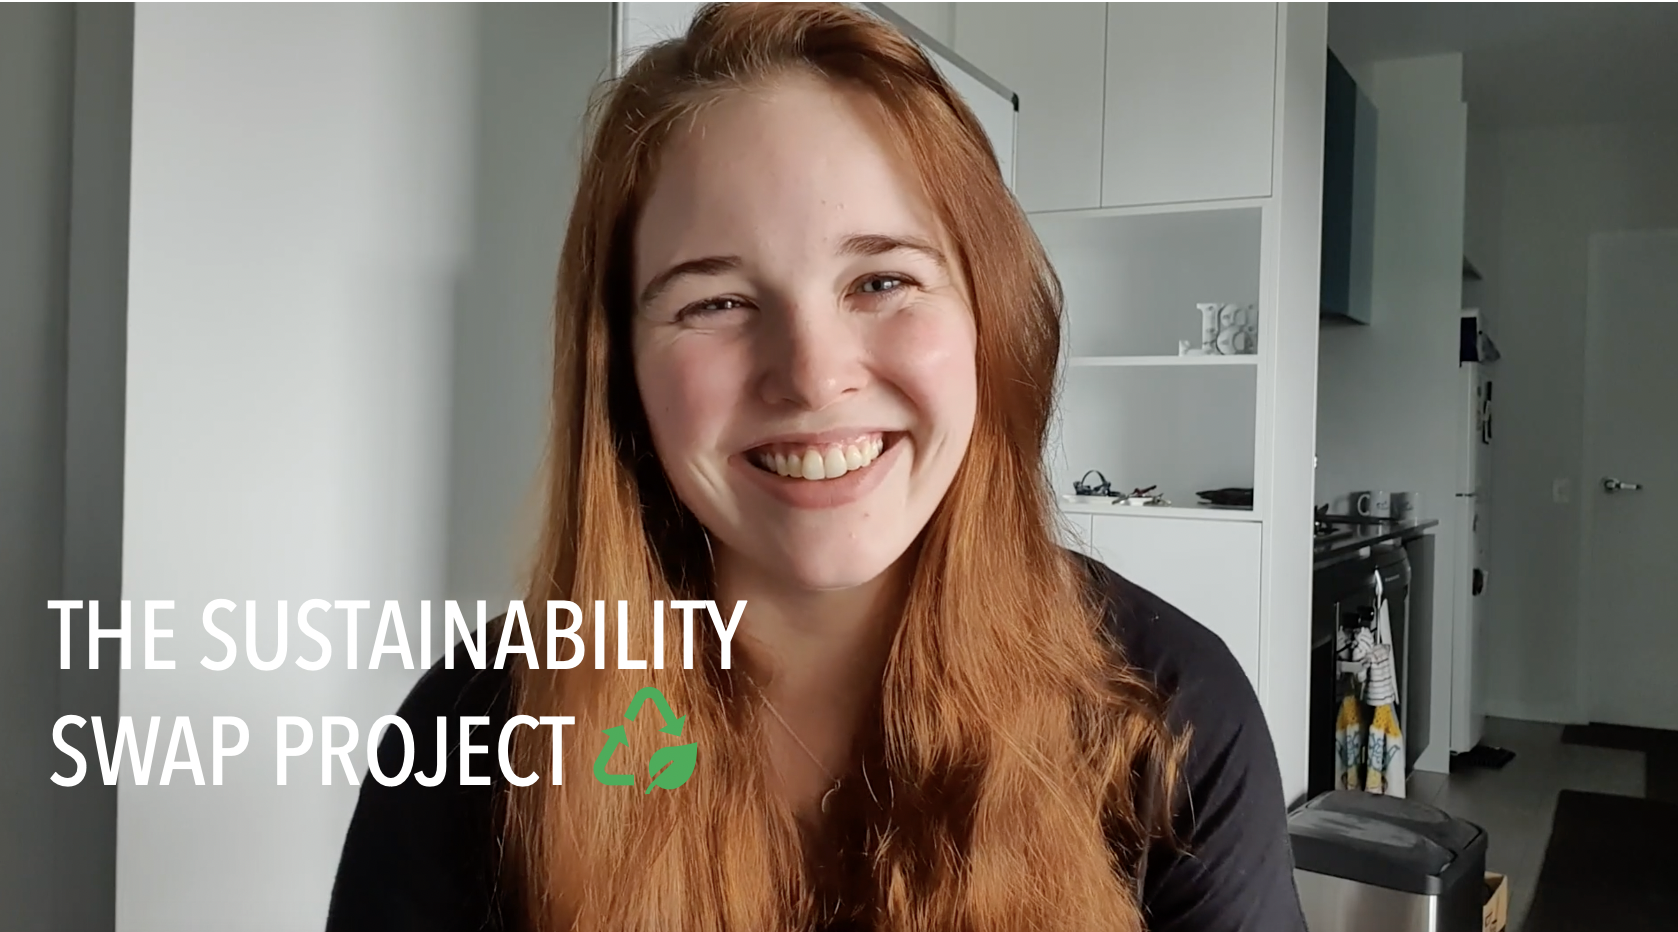 The Sustainability Swap Project